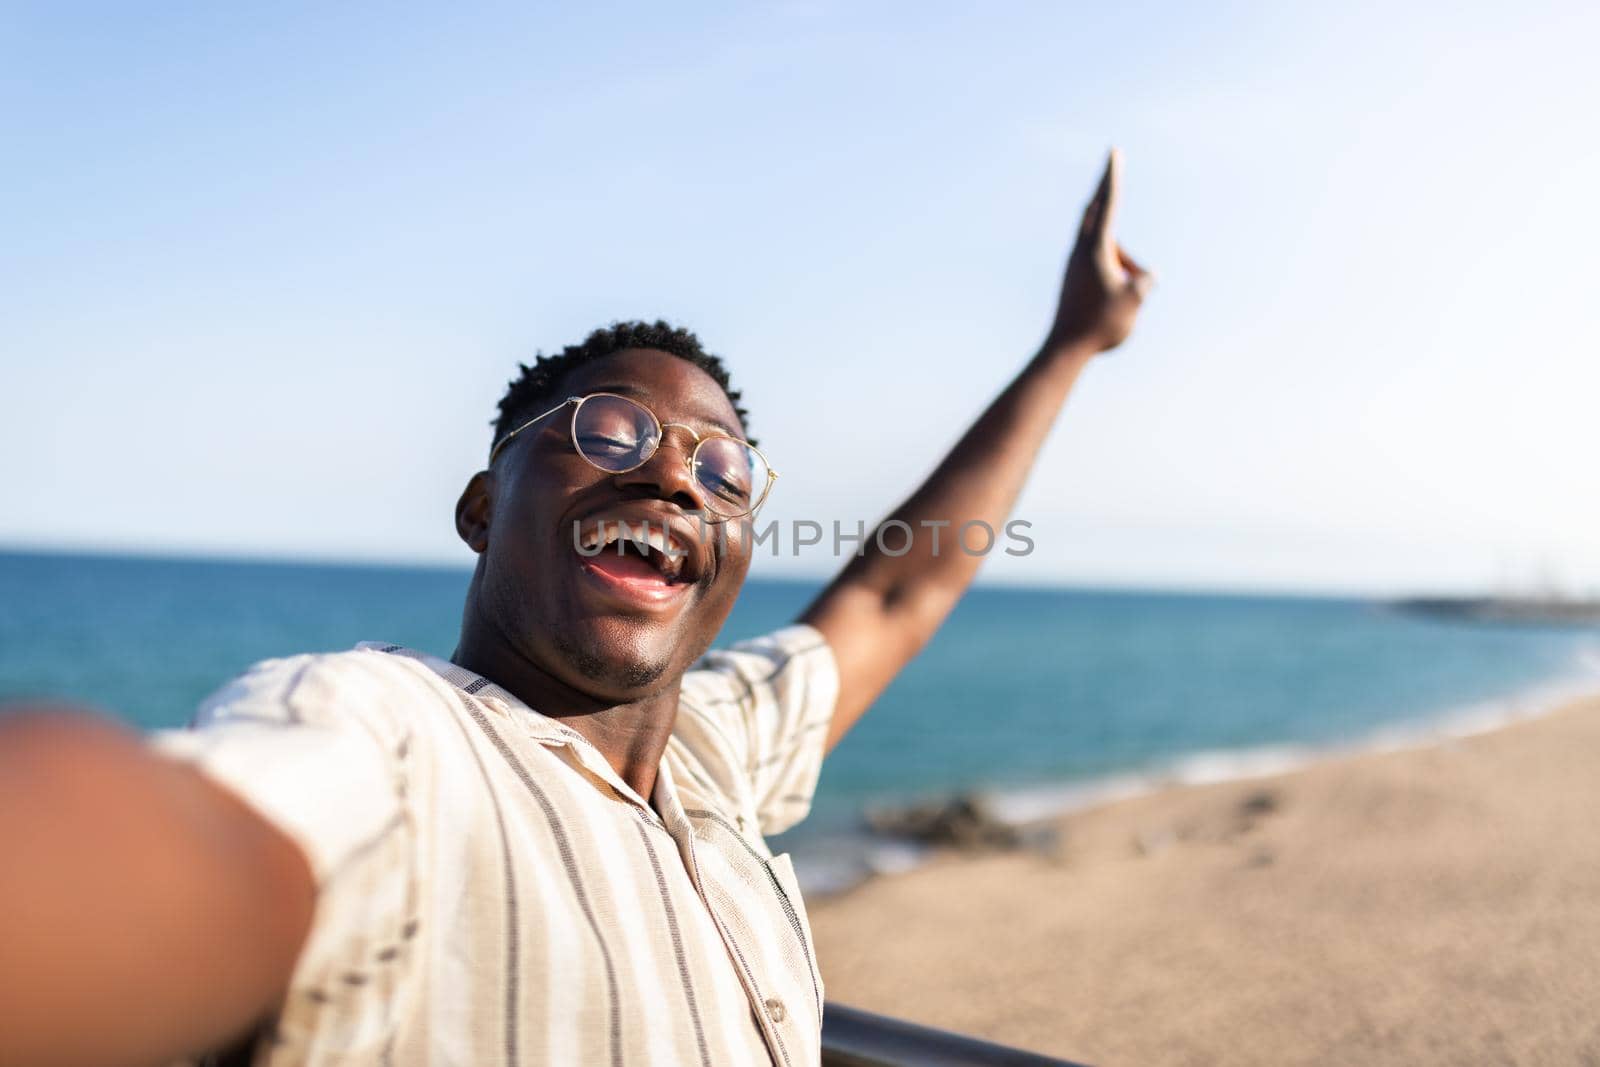 Ecstatic African American man taking selfie at the beach during vacations. Smiling, happy, Black male with glasses looking at camera waving hello. Vacation concept.